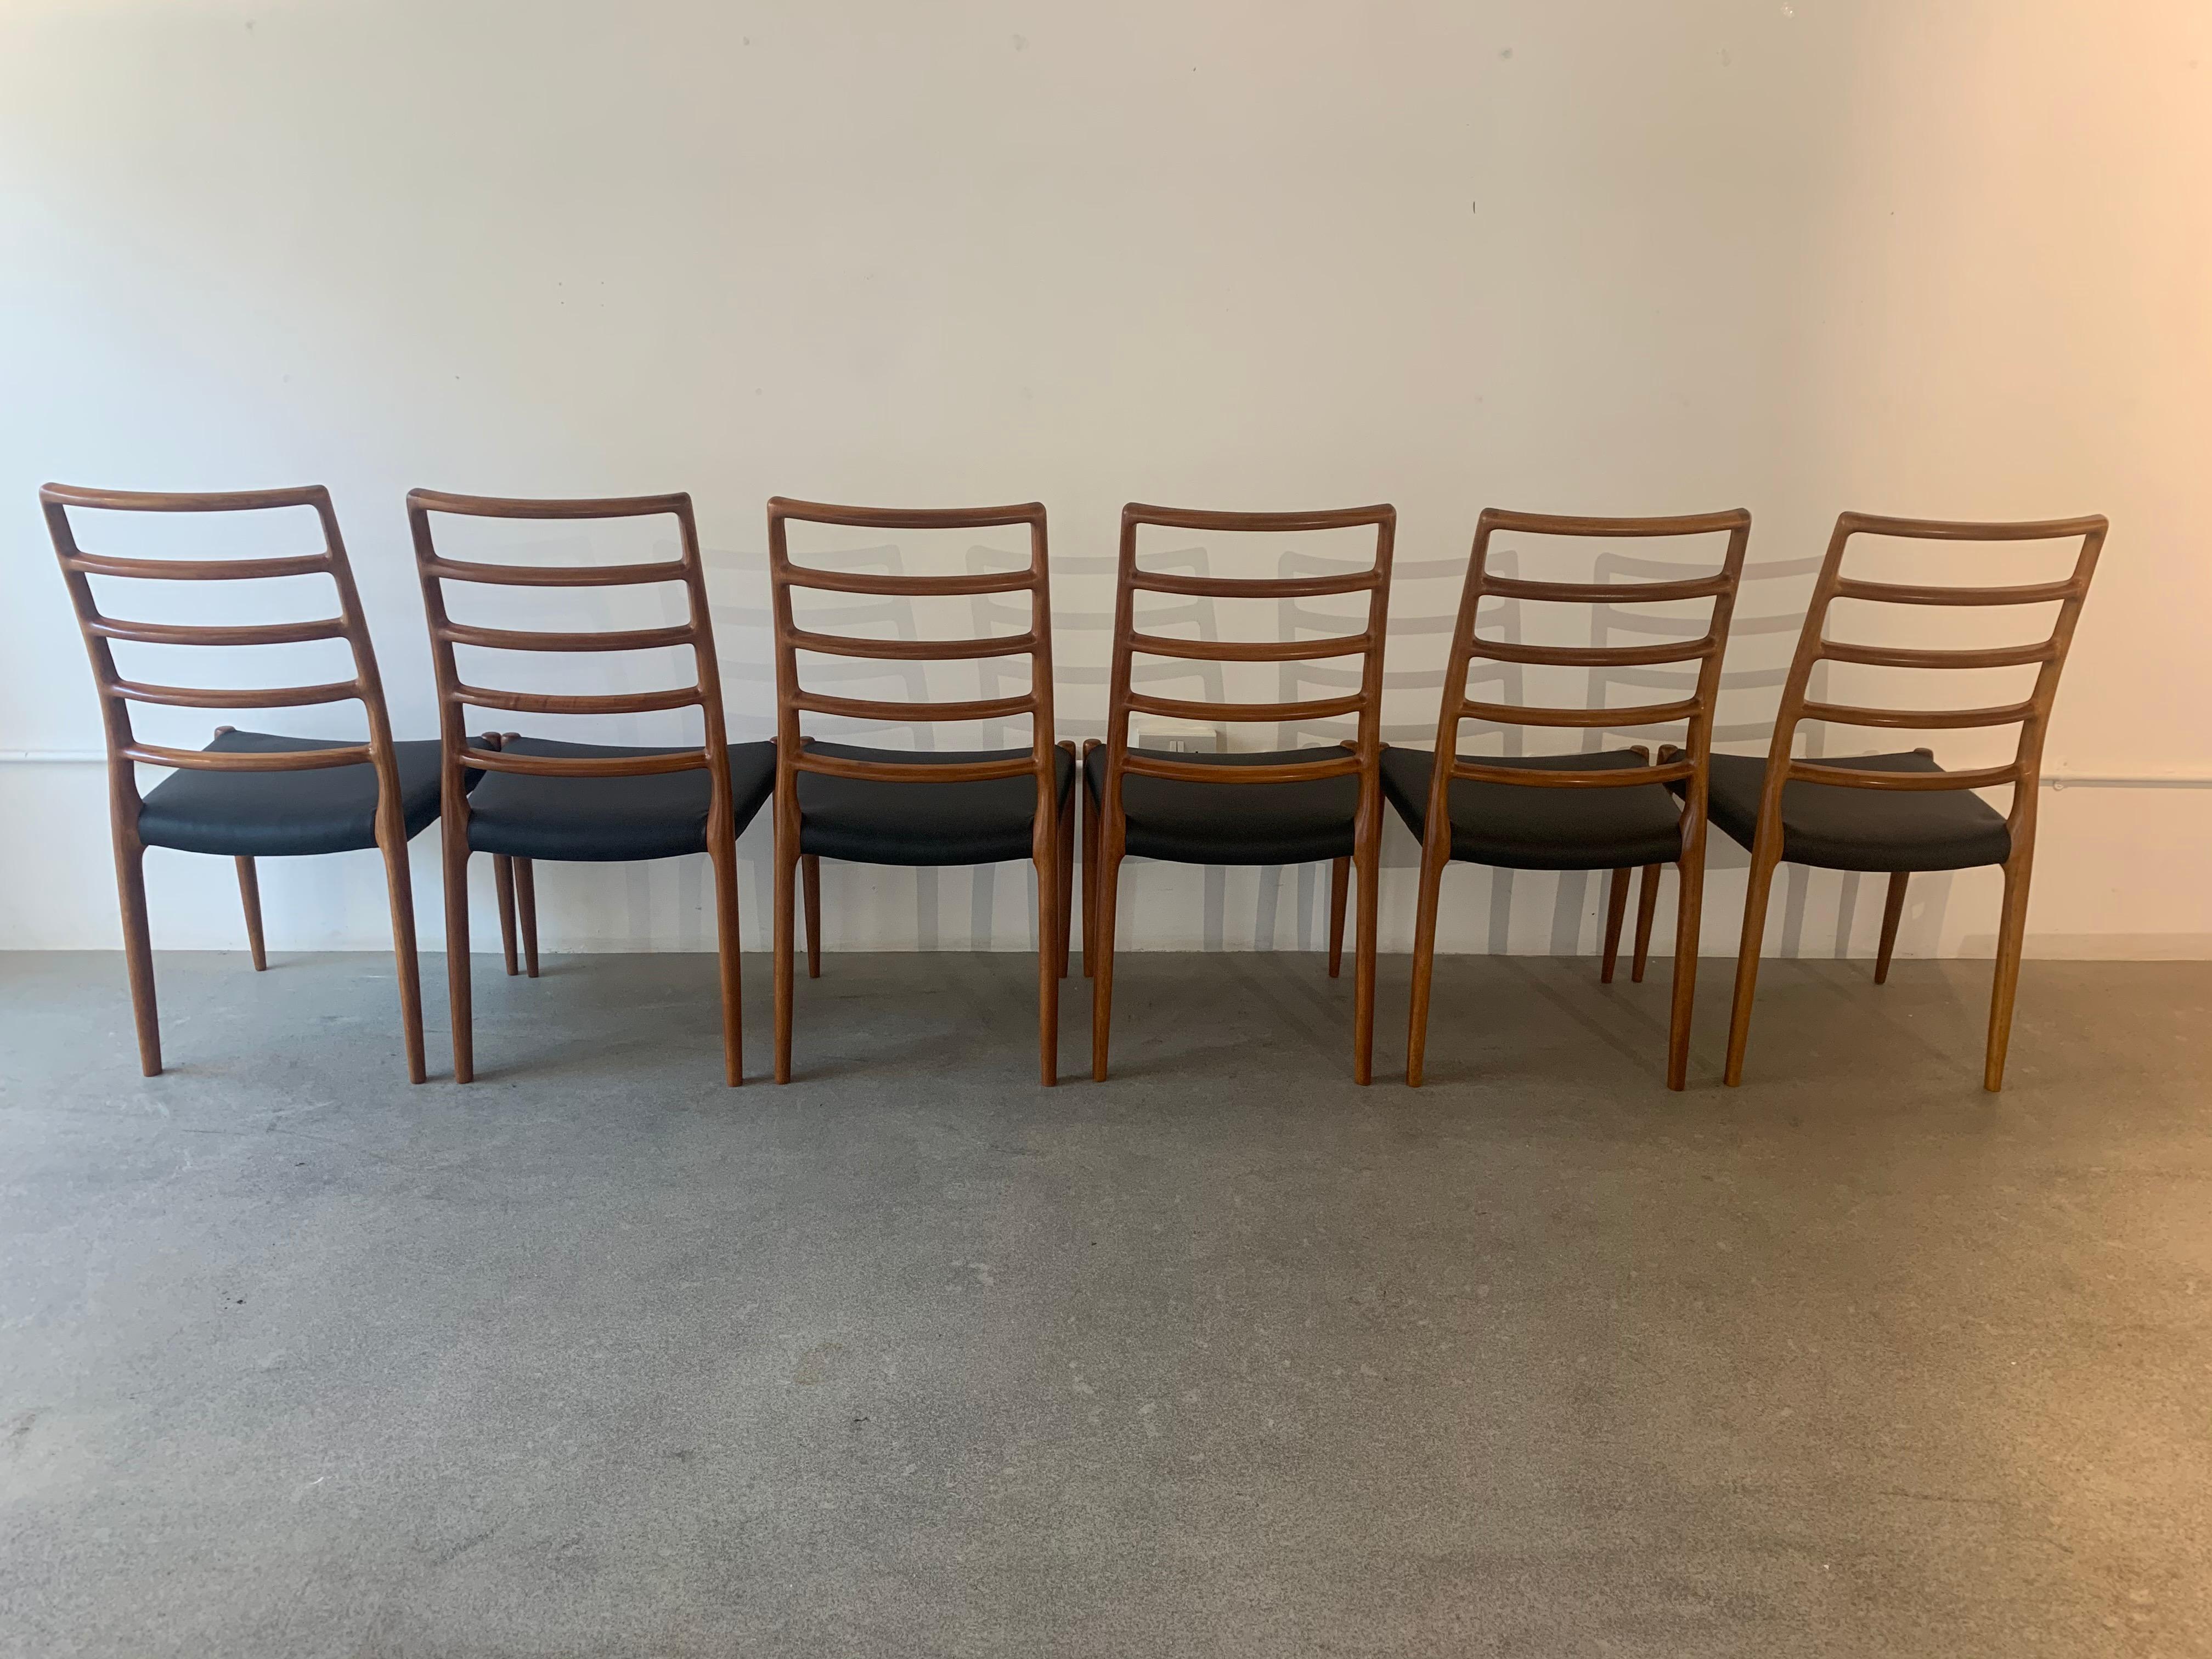 A wonderful set of 6 rare Danish model 82 teak dining chairs which are the taller five-rung ladder-back version designed by Niels O. Møller for J.L. Møllers Møbelfabrik. The Model 82 chairs are one of the rarer designs, most elegant and well